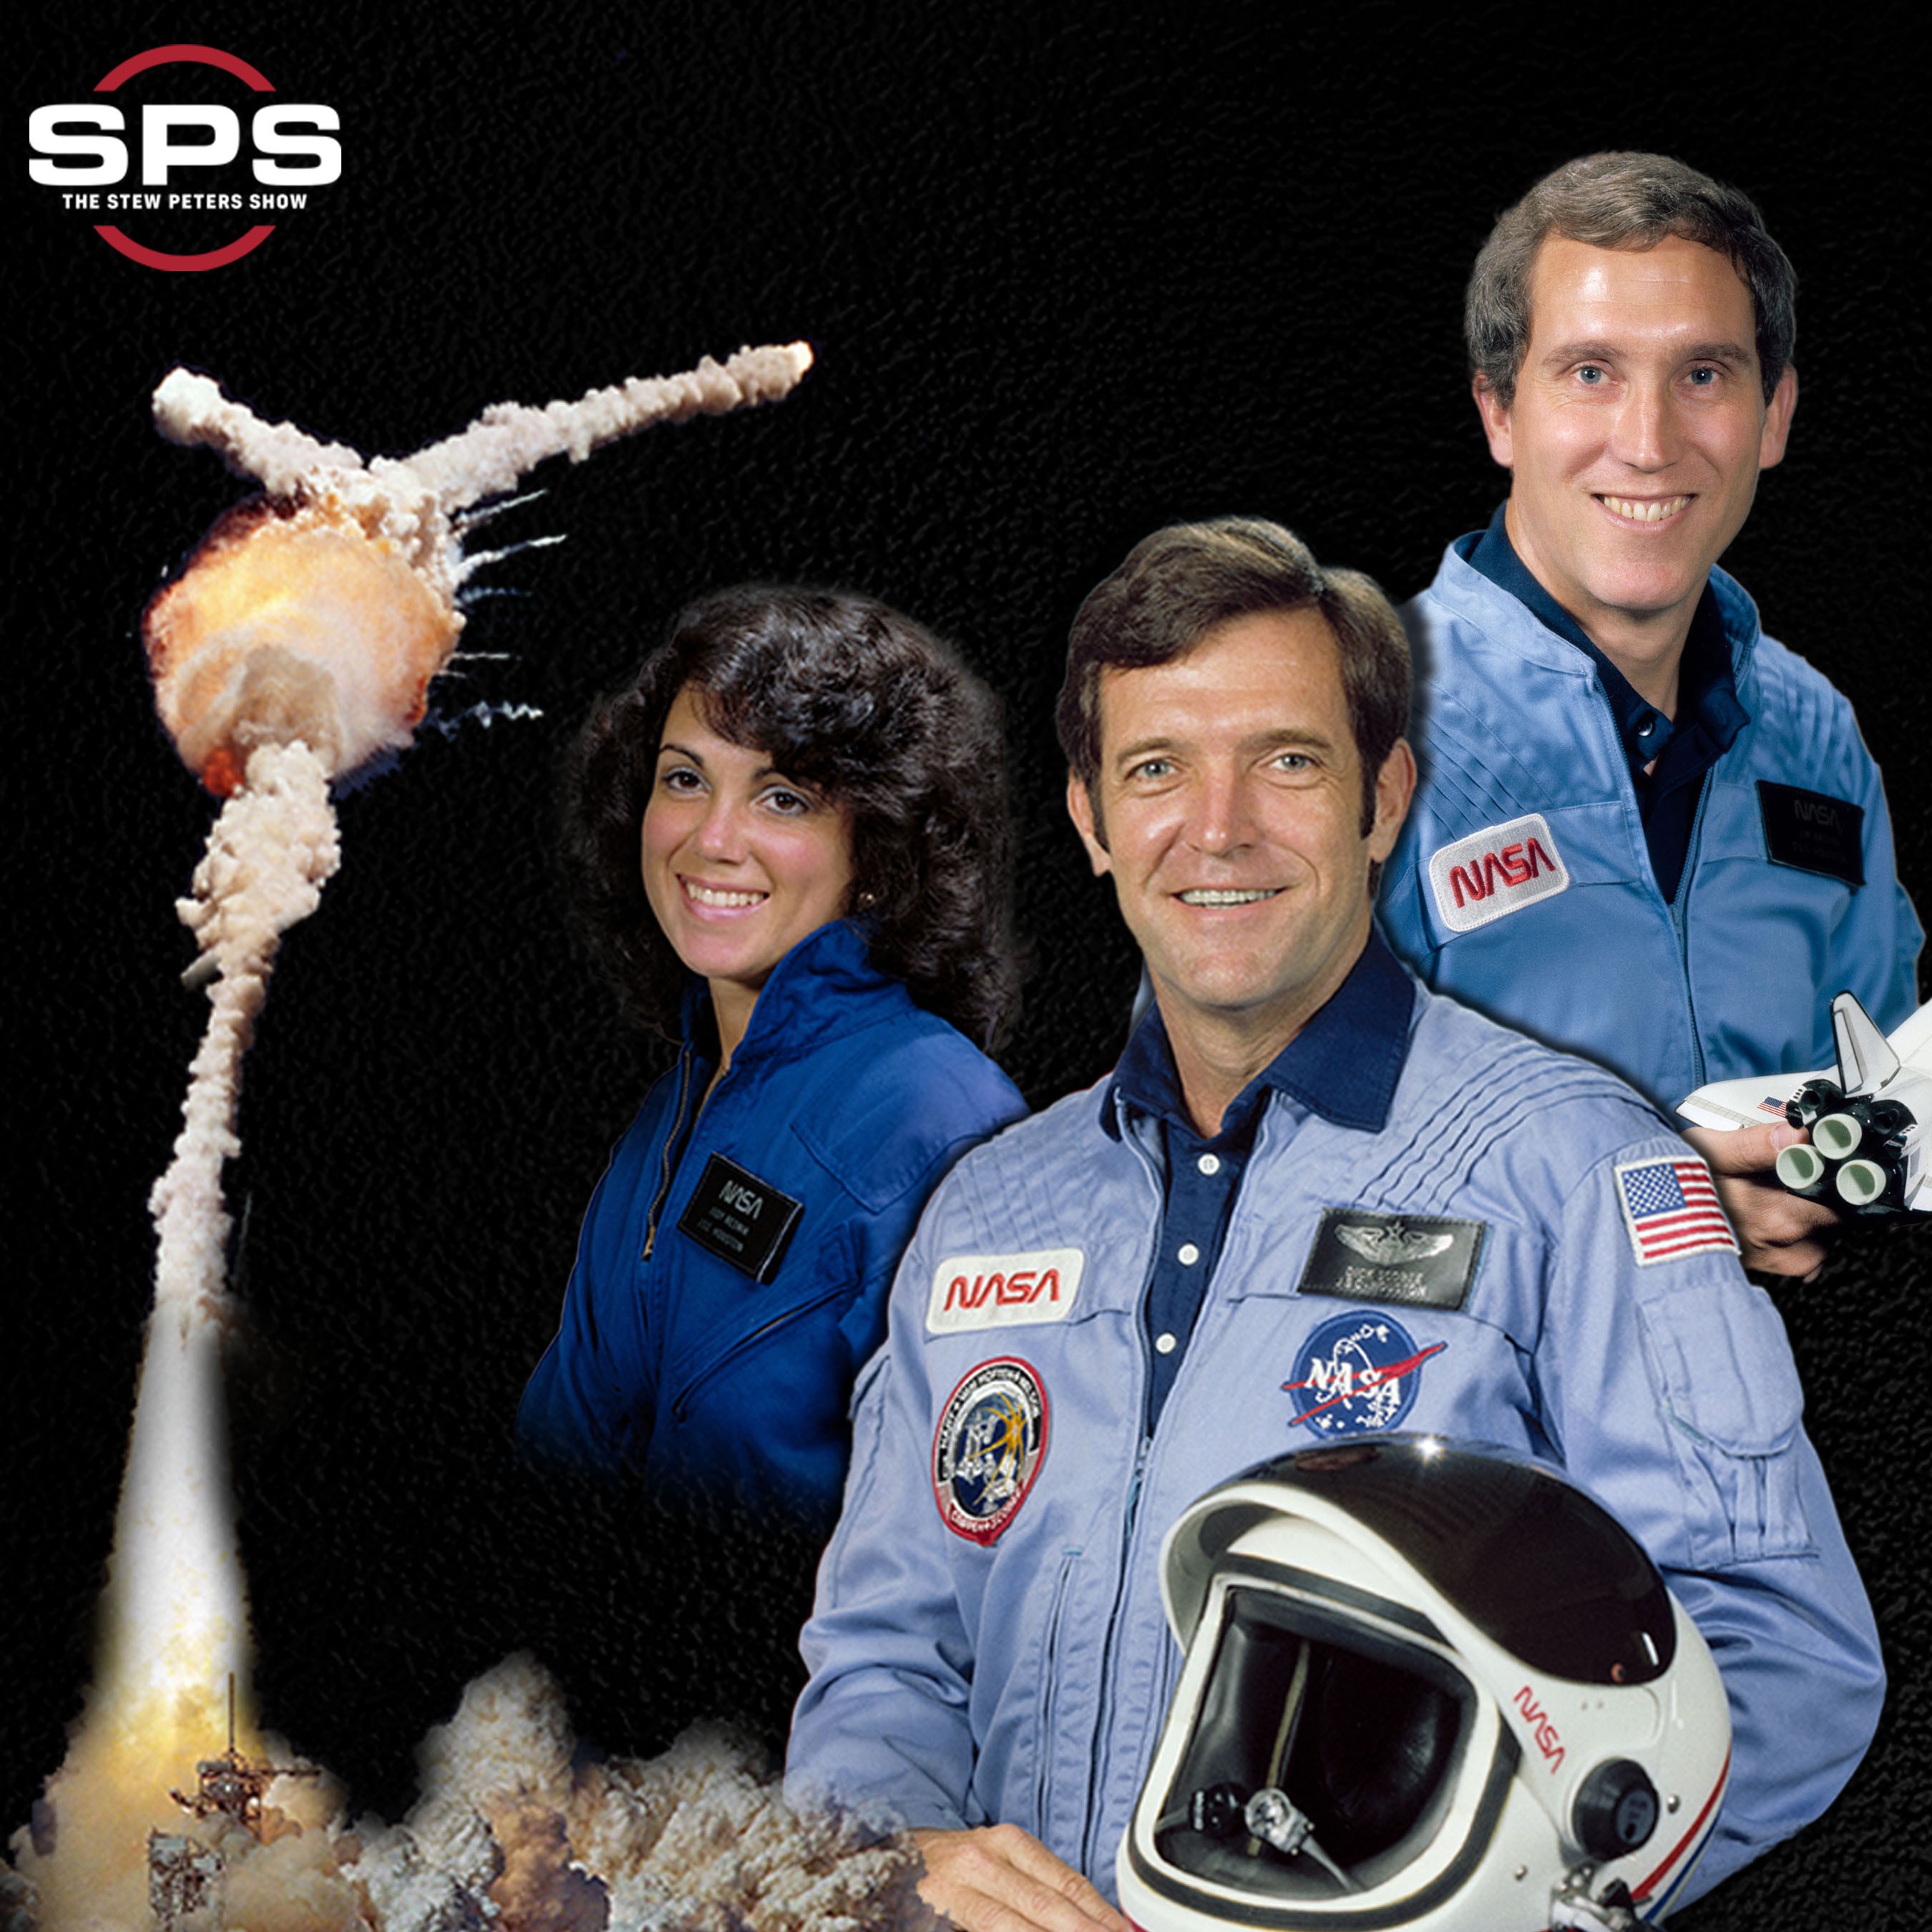 PSYOP: Challenger Disaster HOAX Exposed, Victims Found Alive & Well, NASA's Space Travel LIES!